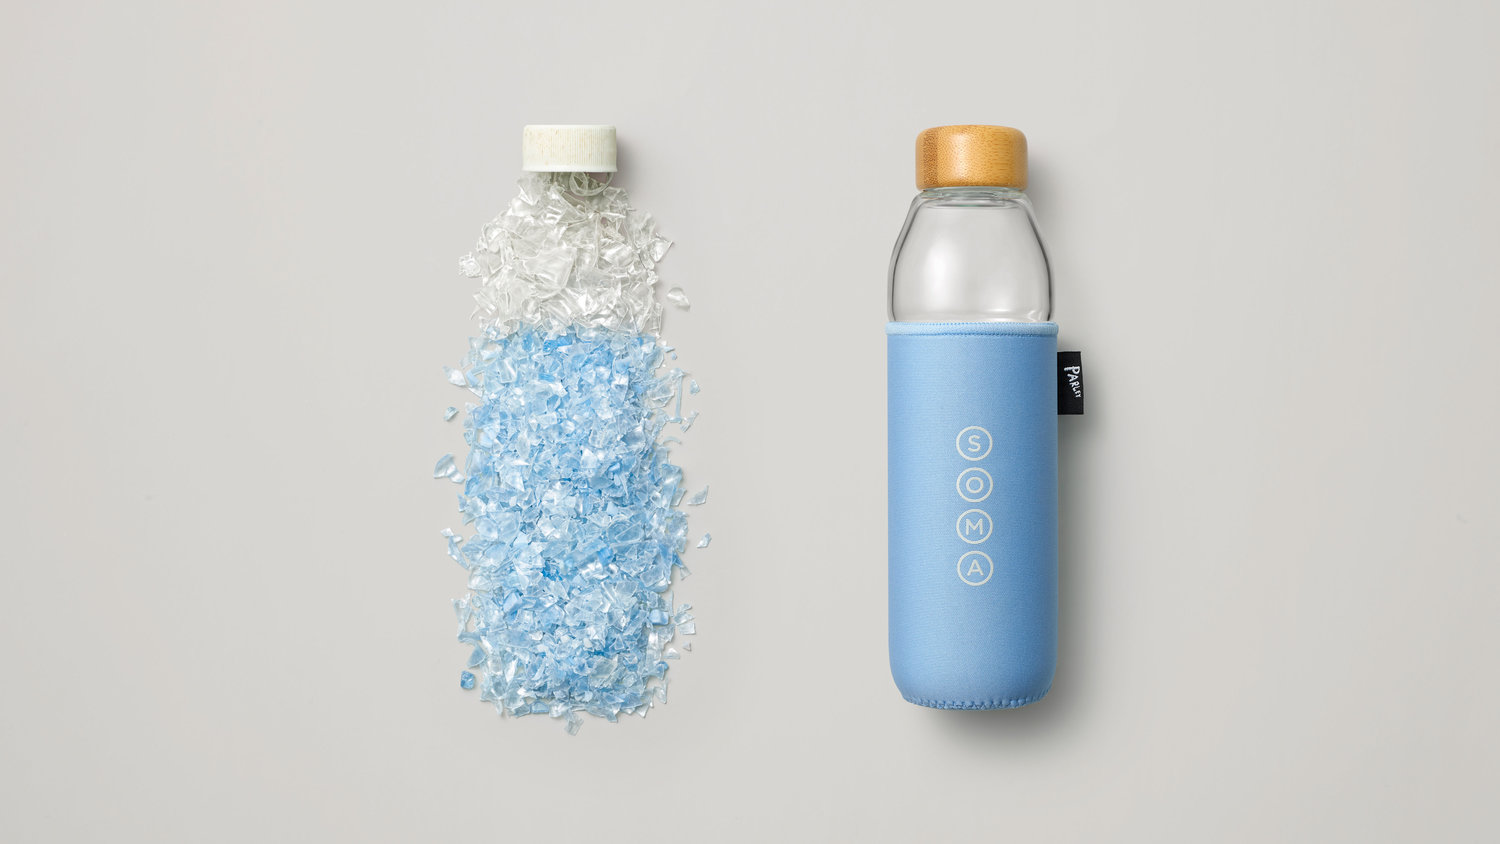 STARBUCKS IS NOW SELLING RECYCLED PLASTIC BOTTLES